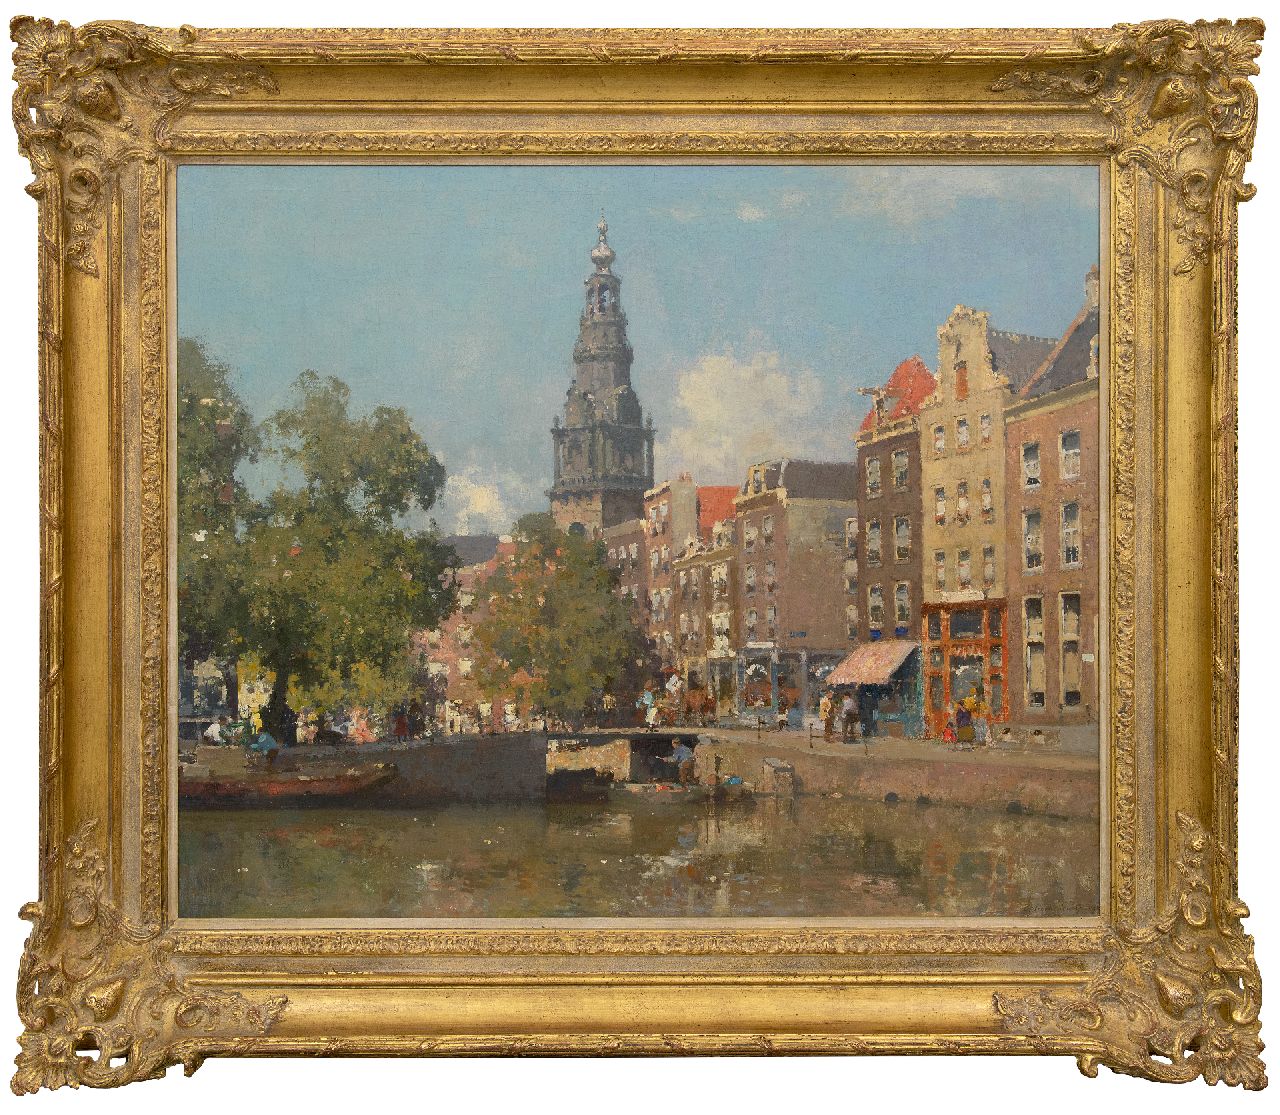 Vreedenburgh C.  | Cornelis Vreedenburgh | Paintings offered for sale | A view of the Raamgracht and the tower of the Zuiderkerk, Amsterdam, oil on canvas 77.0 x 94.0 cm, signed l.r. and dated 1927